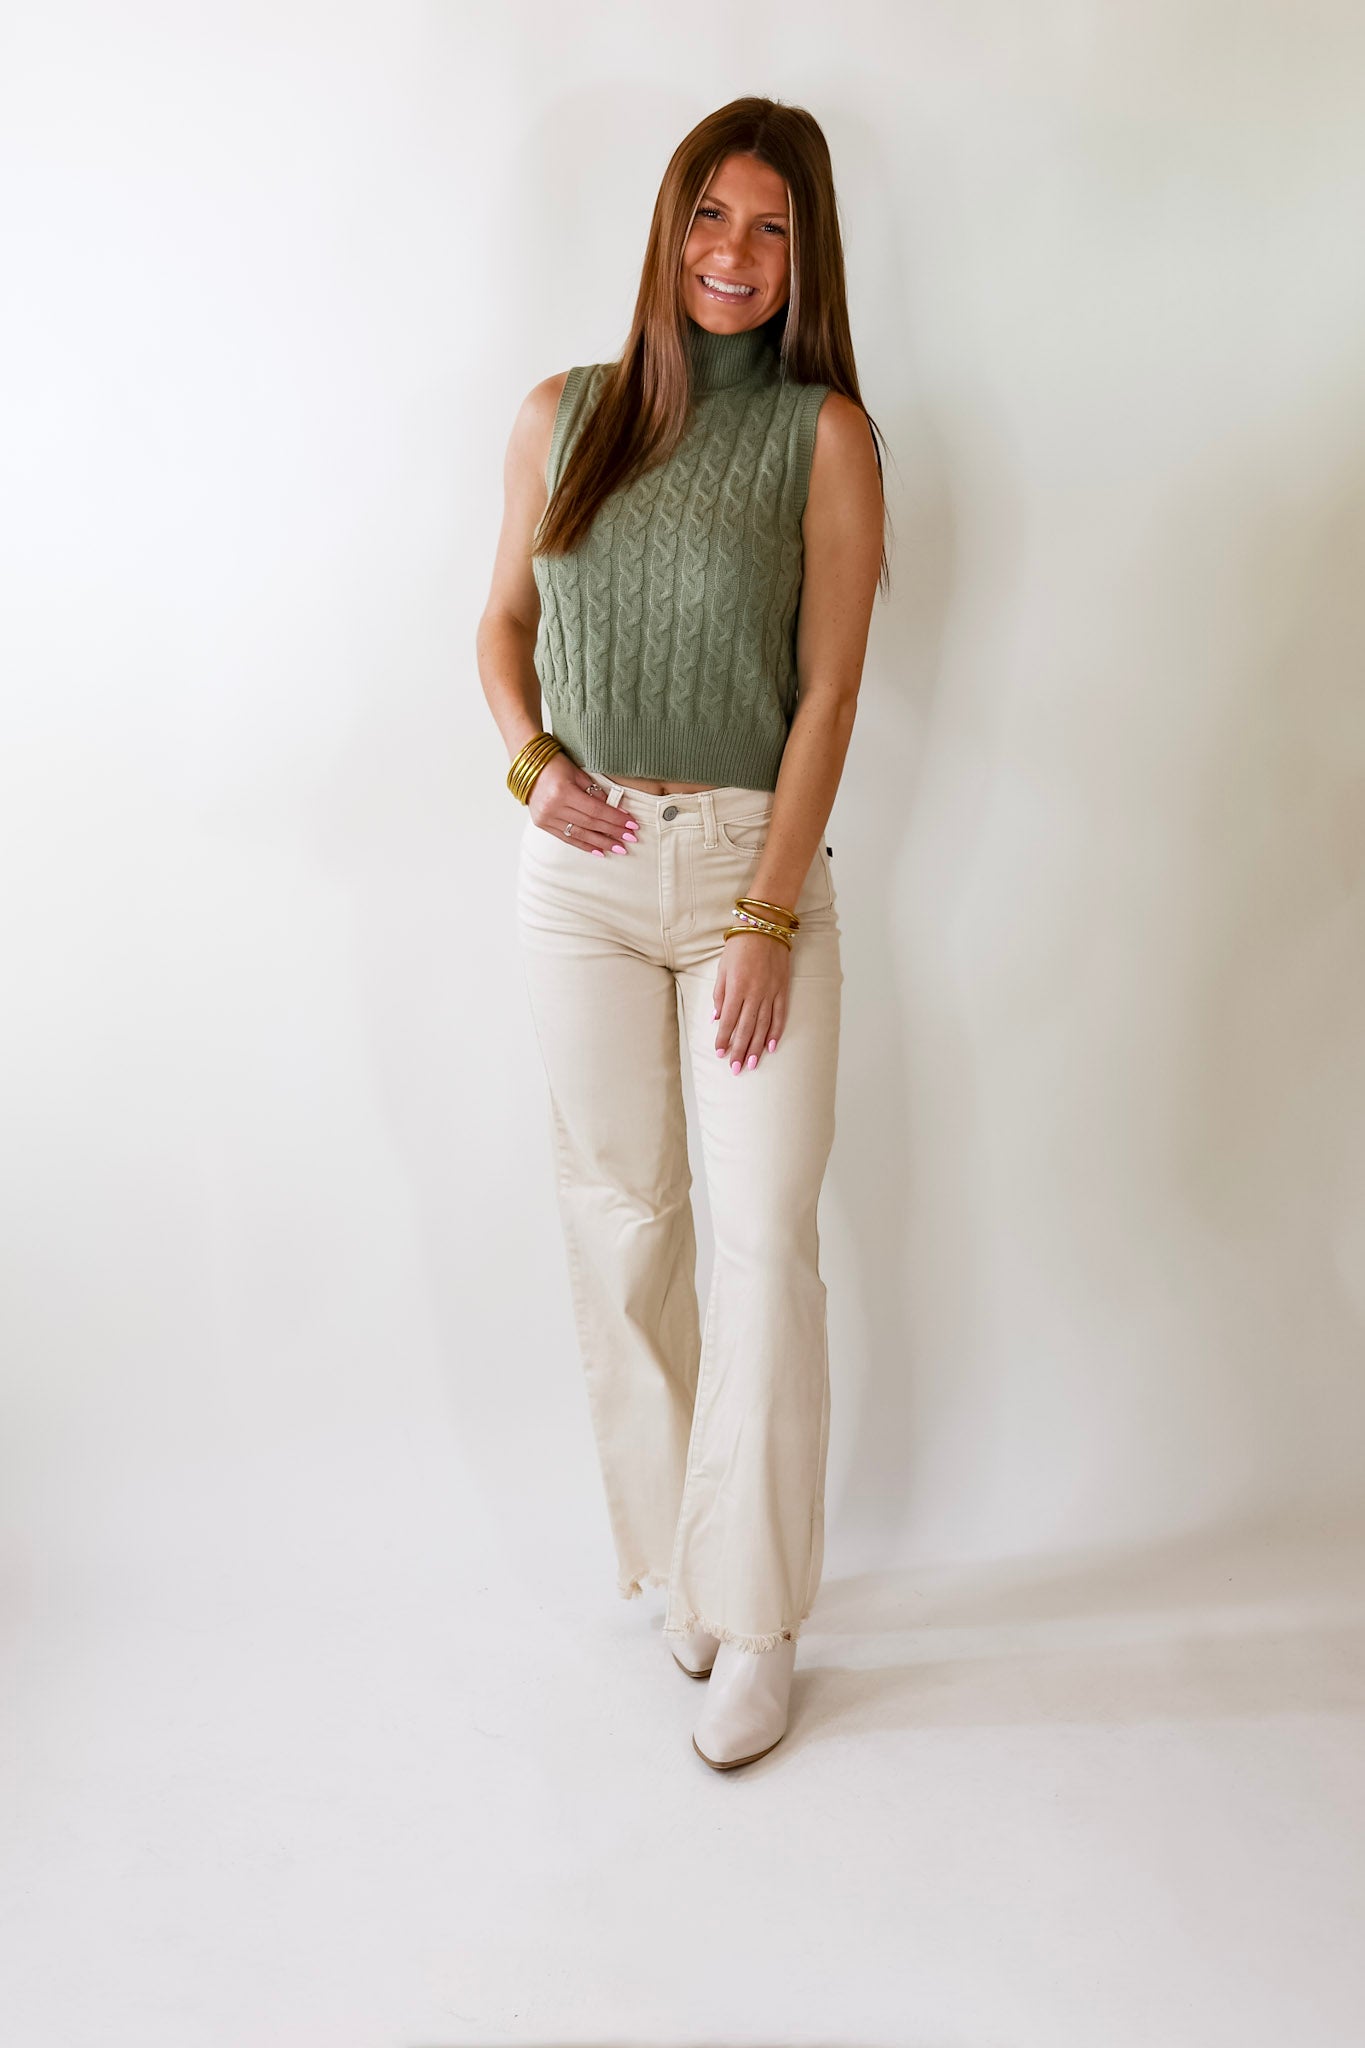 Cider Sips Cropped Sweater Tank Top with High Neck in Sage Green - Giddy Up Glamour Boutique